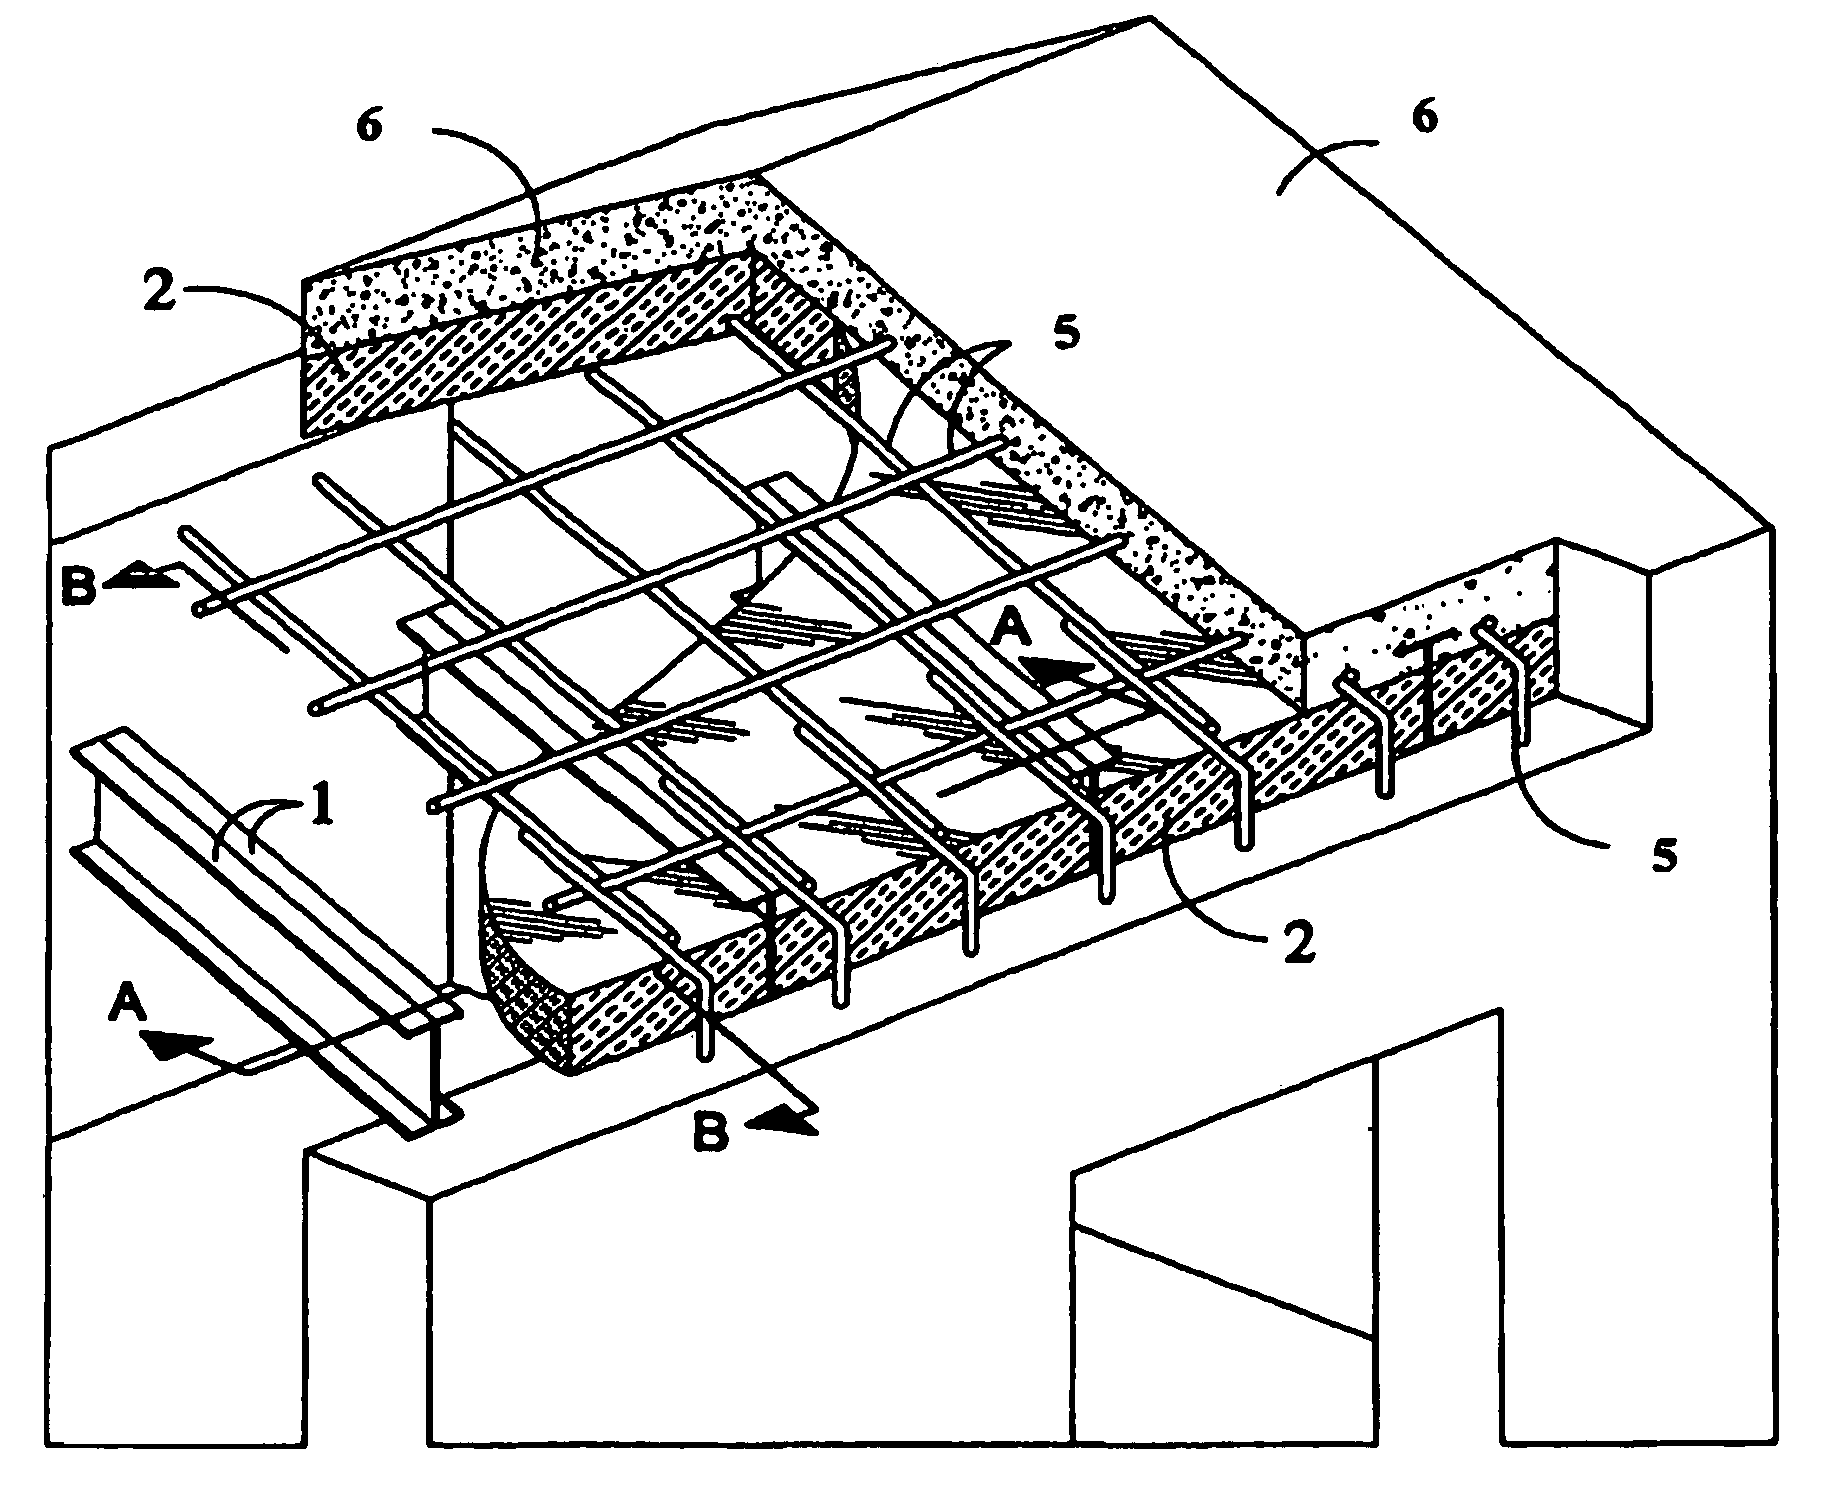 Concrete slab system with self-supported insulation